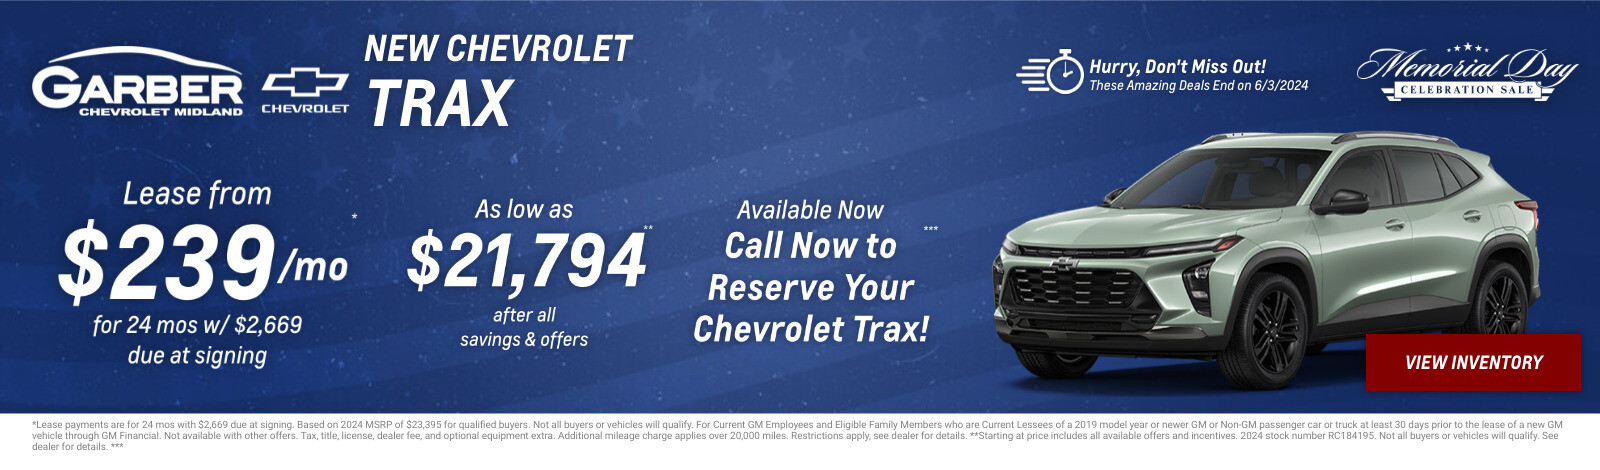 New Chevrolet Trax Current Deals and Offers in Midland, MI